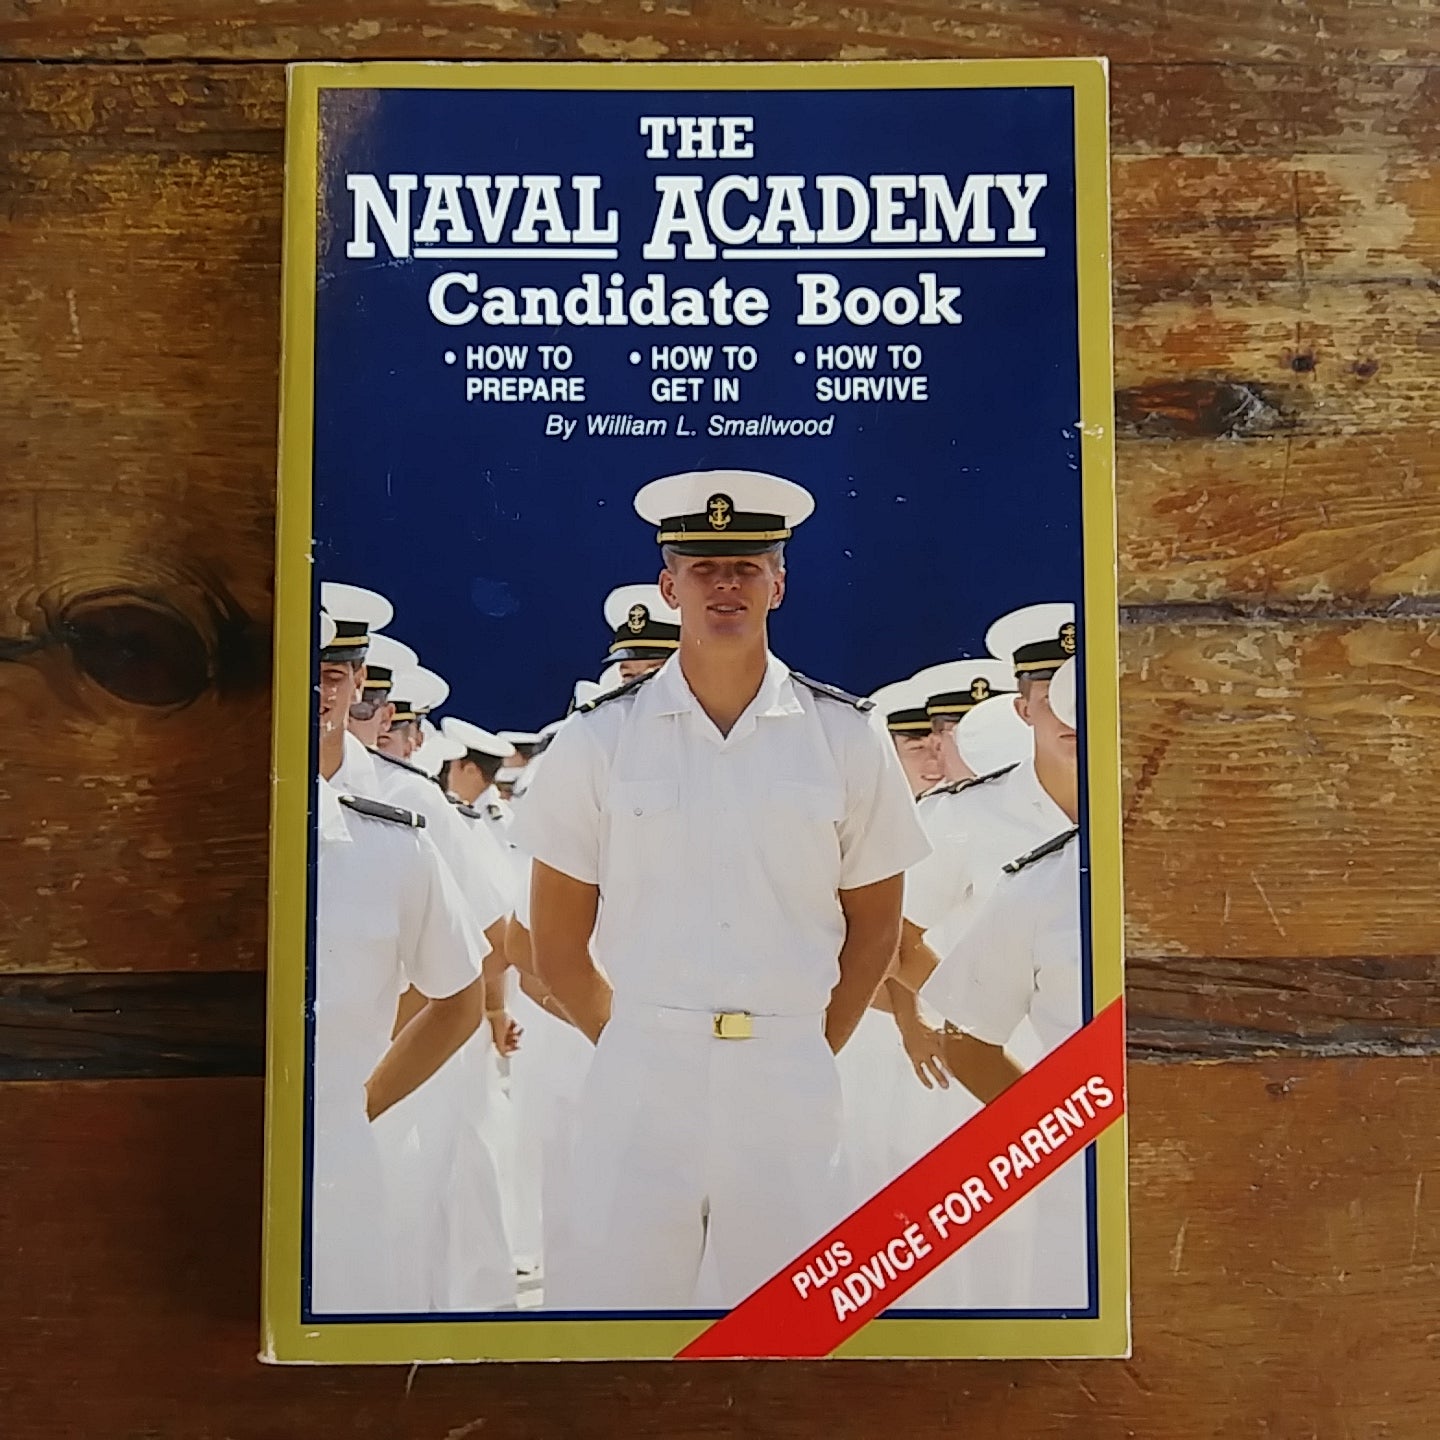 Book, "The Naval Academy Candidate Book - How to Prepare, How to Get In, How to Survive"